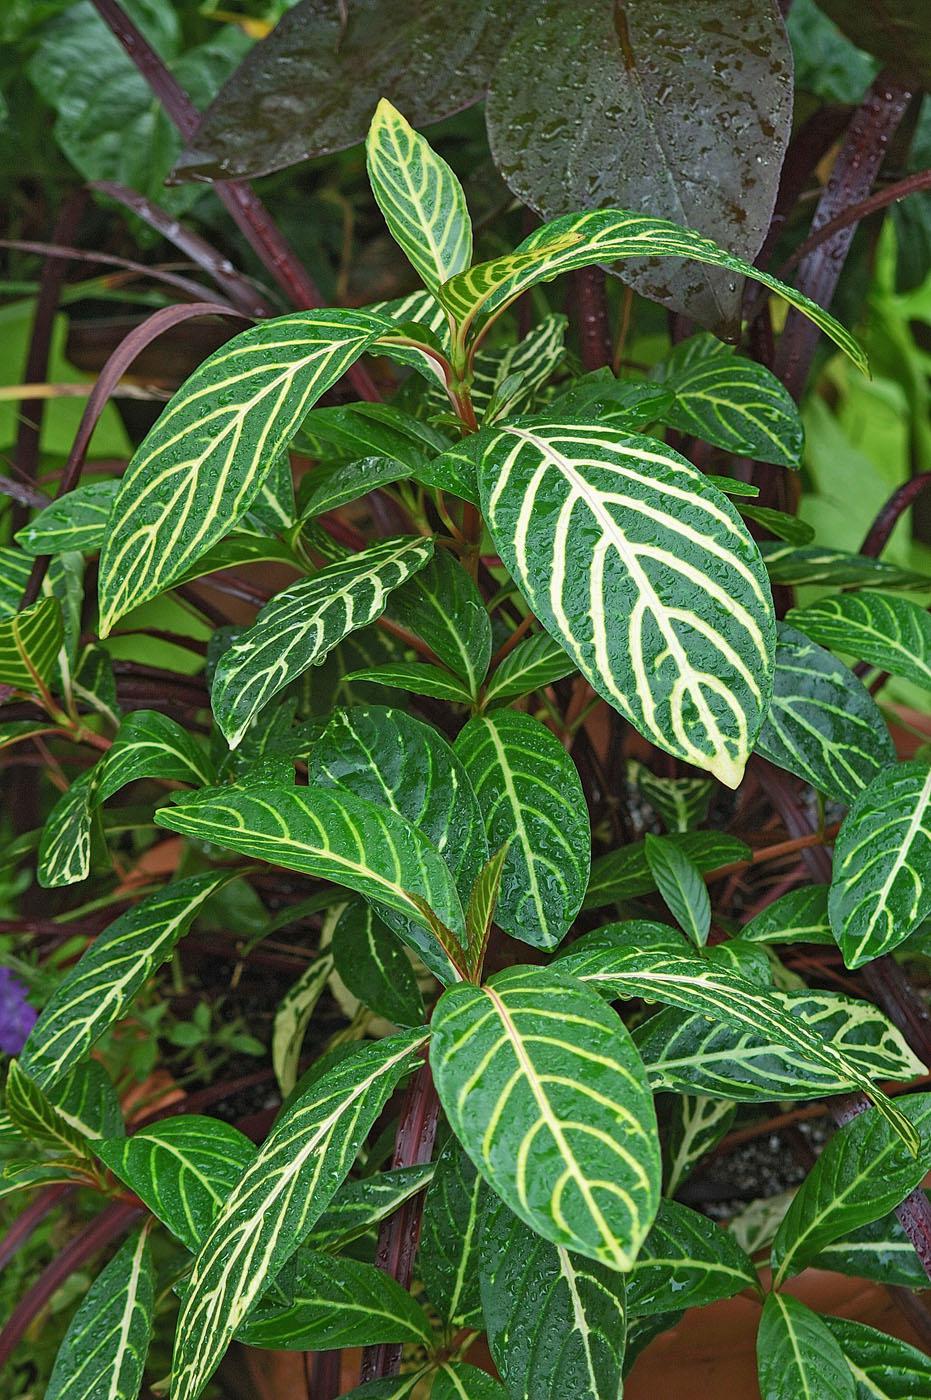 Ellen sanchezia starts a little slow but is a real star after it becomes acclimated. The leaves are dark green and variegated with yellowish or chartreuse zebra stripes.